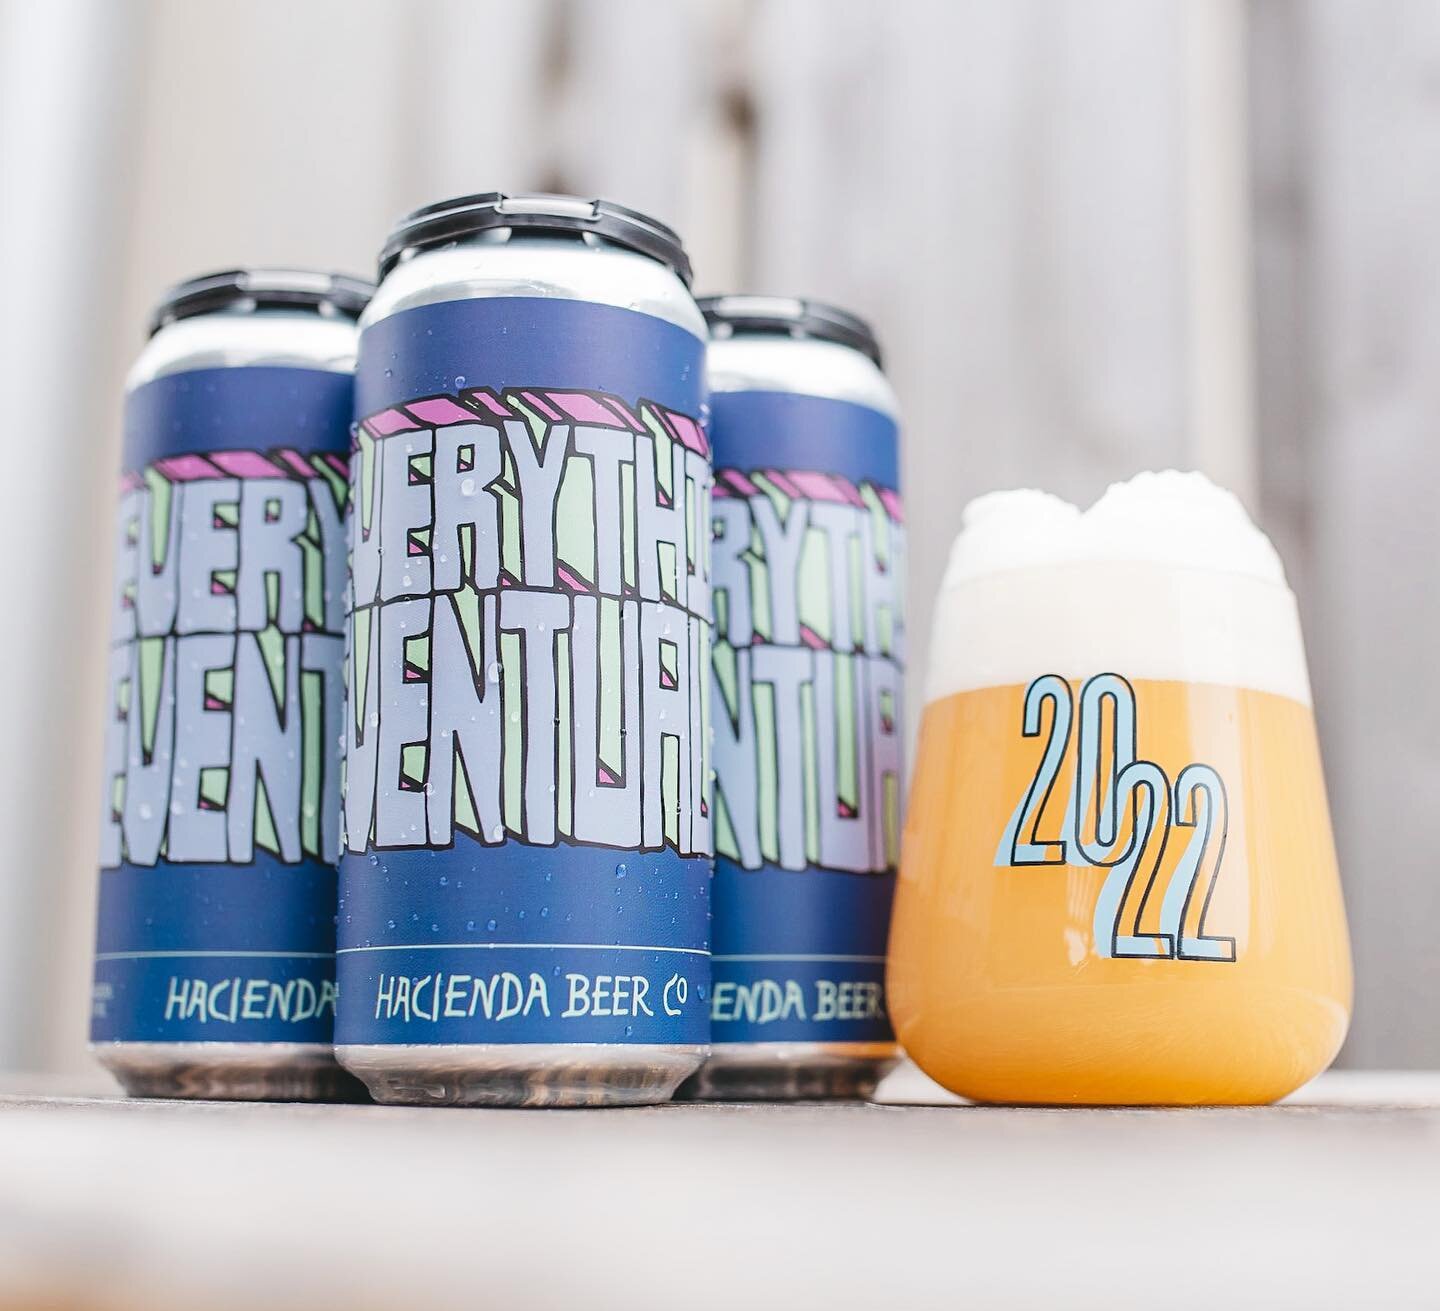 TODAY. 💥

We welcome a fresh batch of your favorite Hazy Pale Ale, the original Everything Eventually. 

Loaded with Citra, plus a touch of Azacca &amp; Strata, on an oat-heavy base. Punchy notes of peach, orange, pineapple &amp; grapefruit.

4-pack